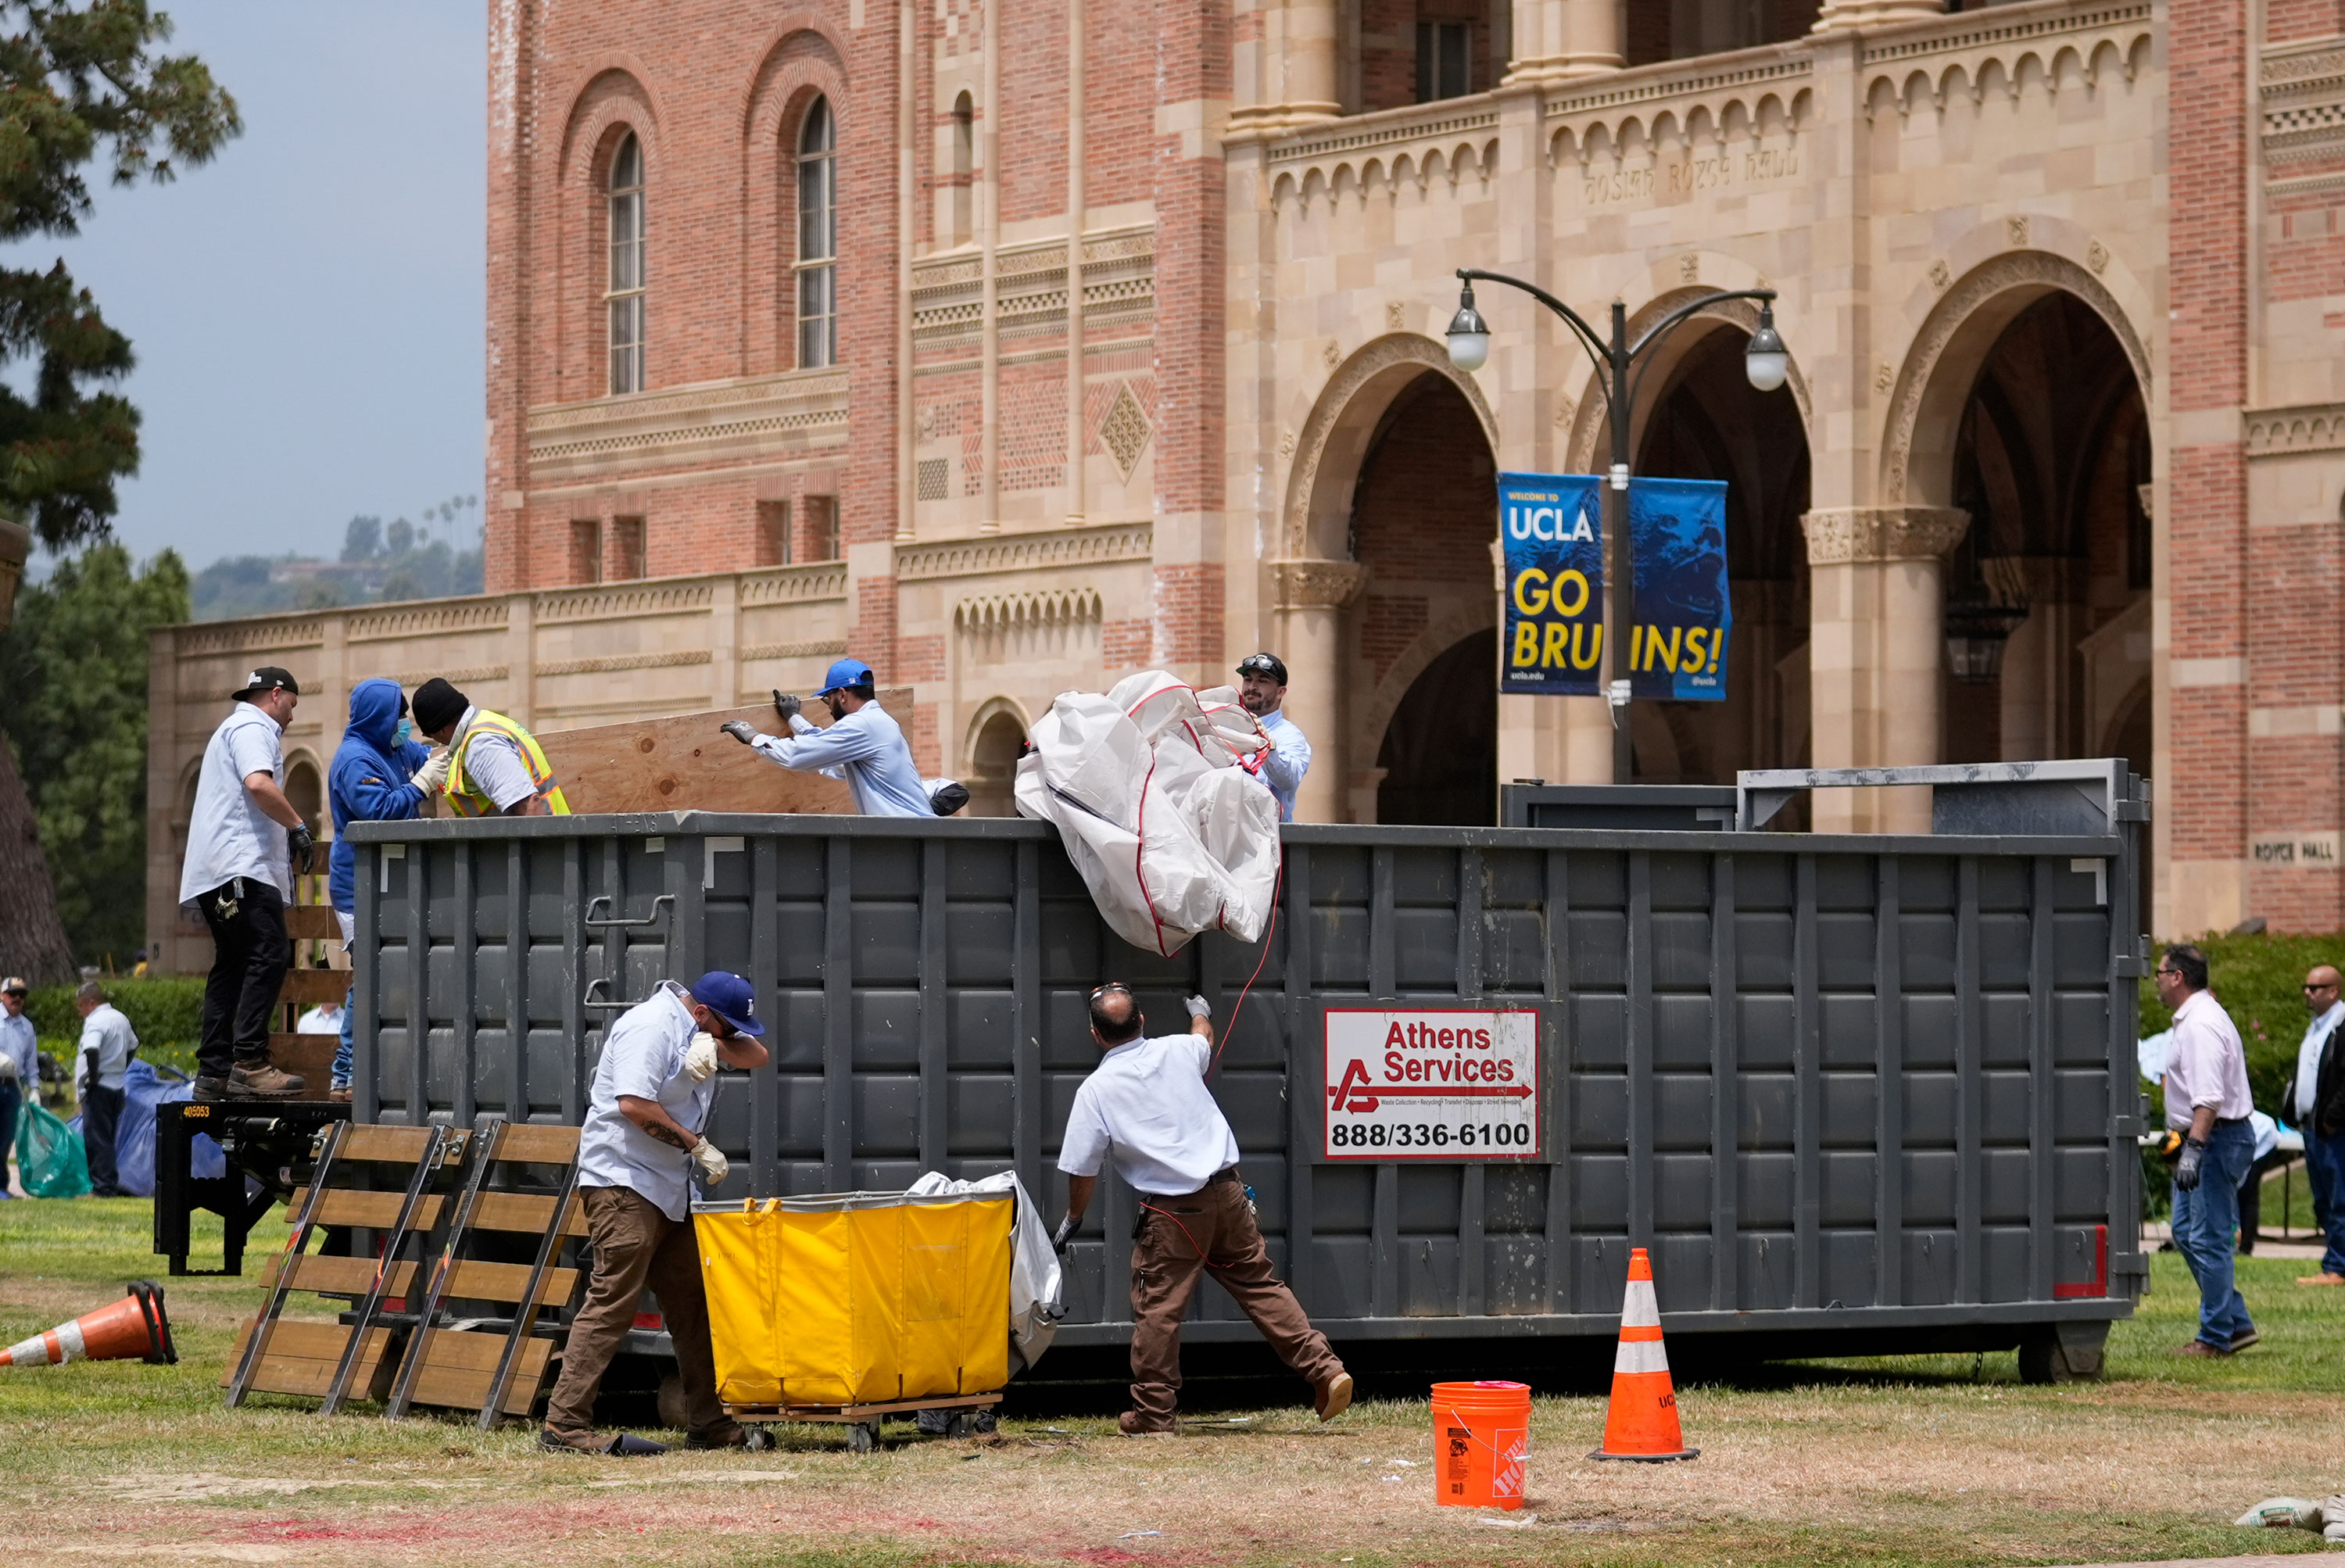 Items are removed from the site of a pro-Palestinian encampment on the UCLA campus in Los Angeles on May 2, after it was cleared by police. 